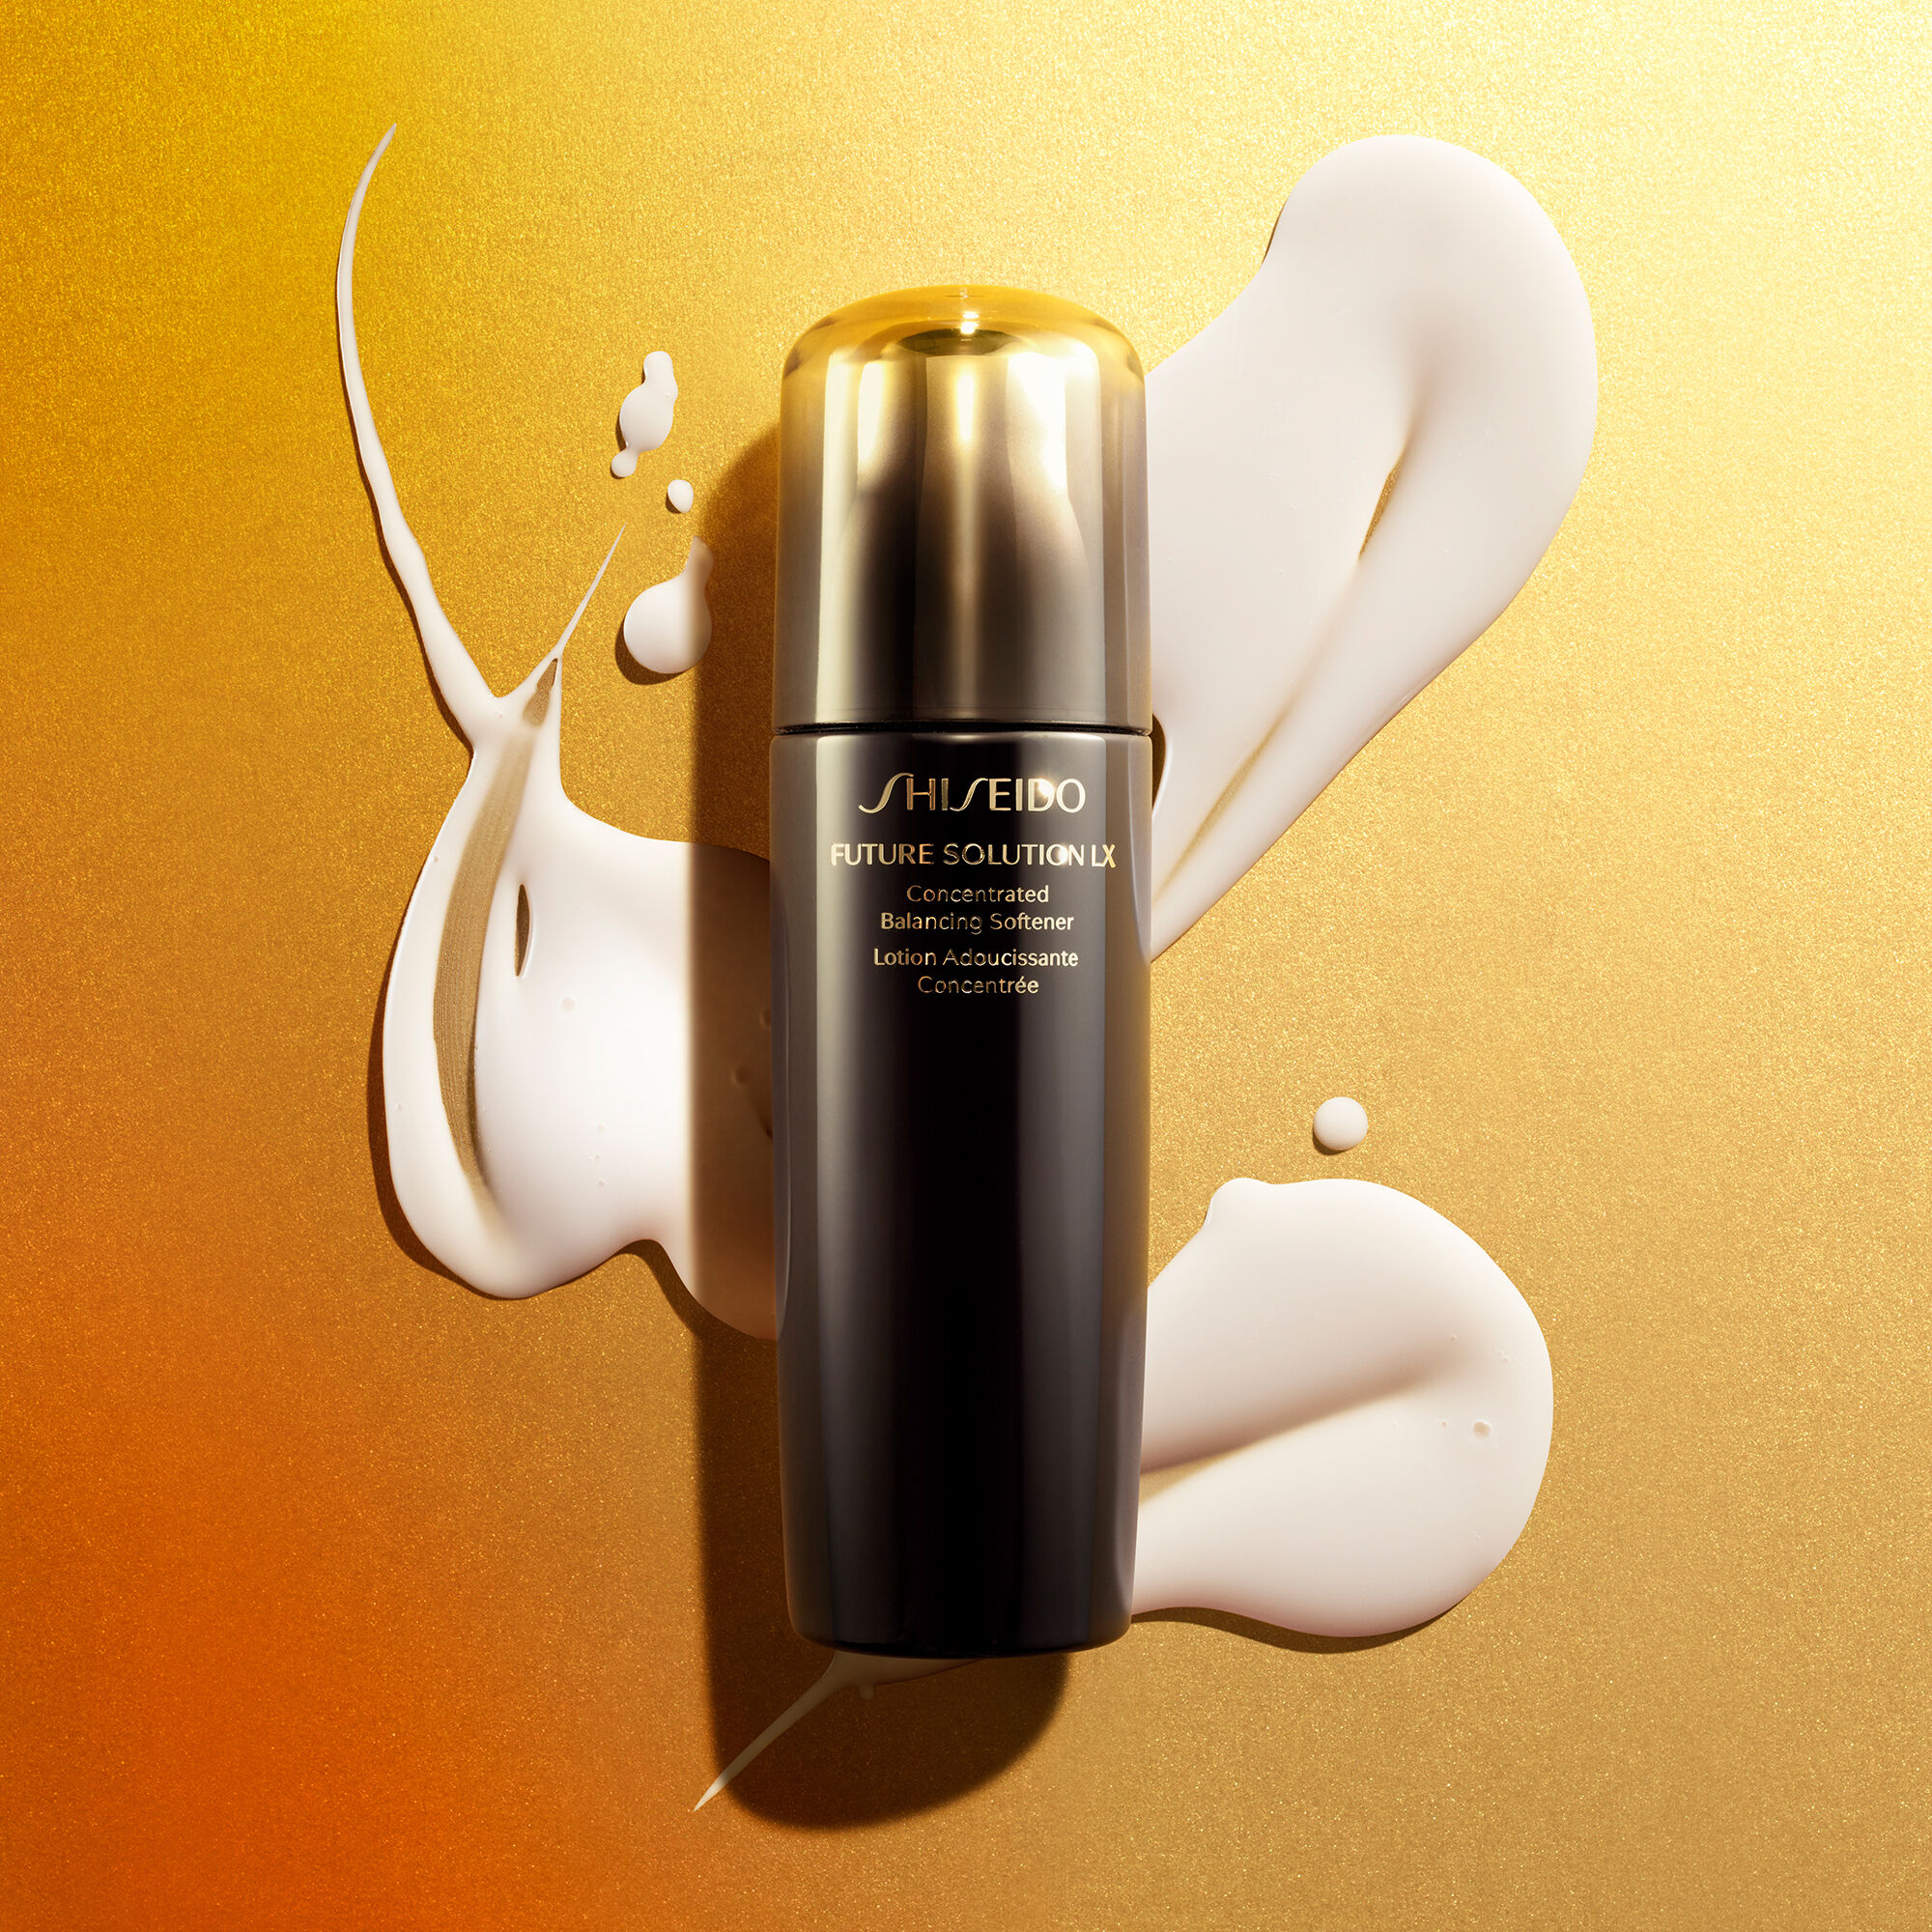 Future Solution LX Concentrated Balancing Softener | SHISEIDO